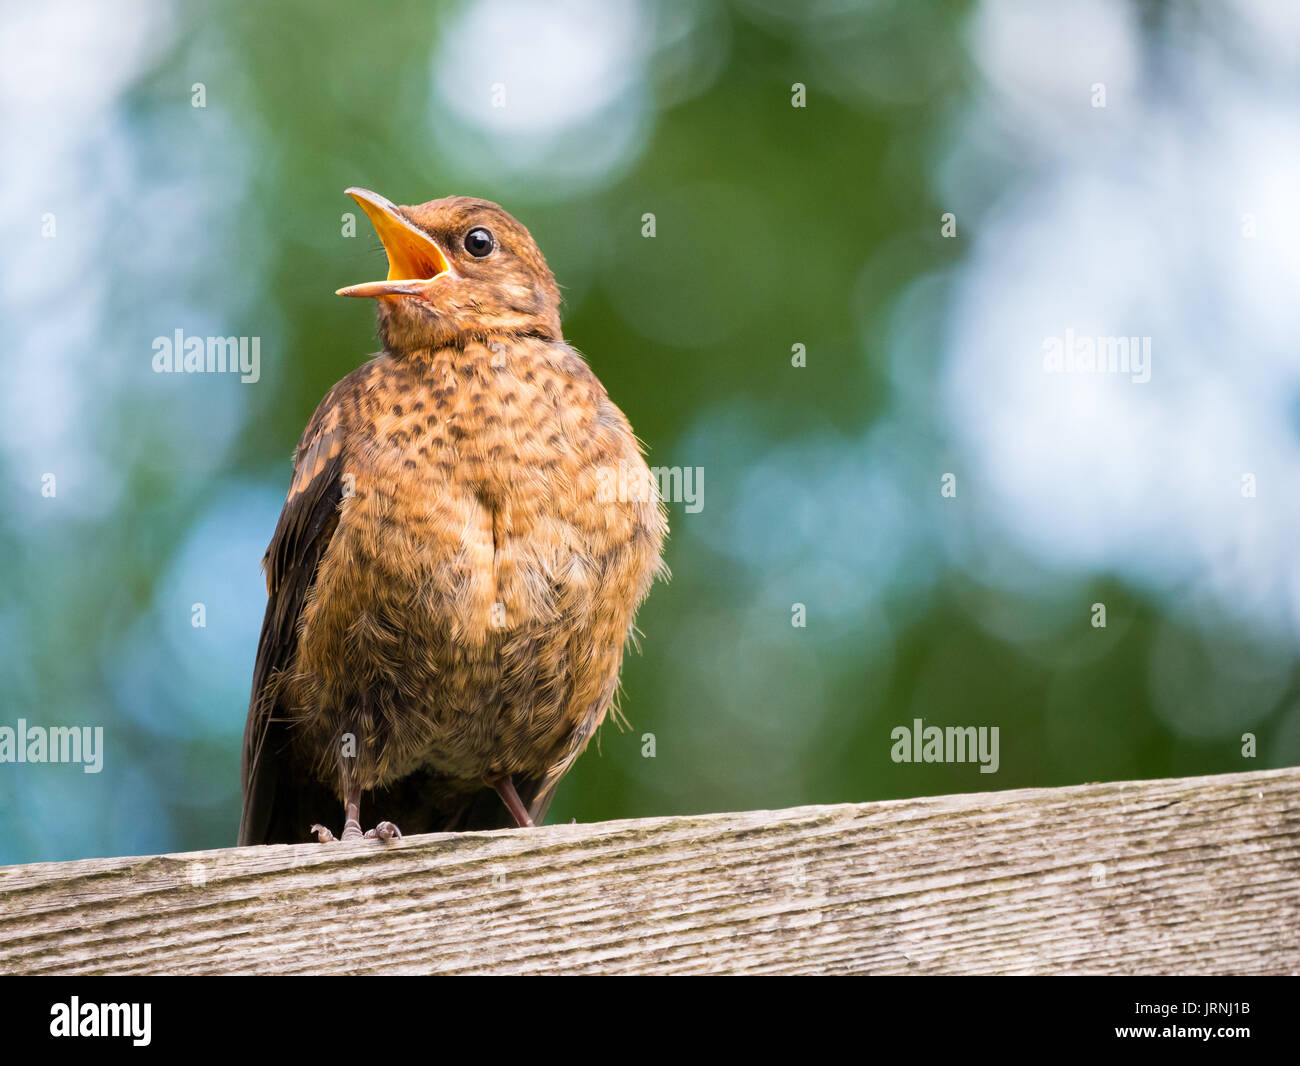 Portrait of juvenile common blackbird, Turdus merula, begging for food with open mouth standing on wooden beam in garden with bokeh background Stock Photo